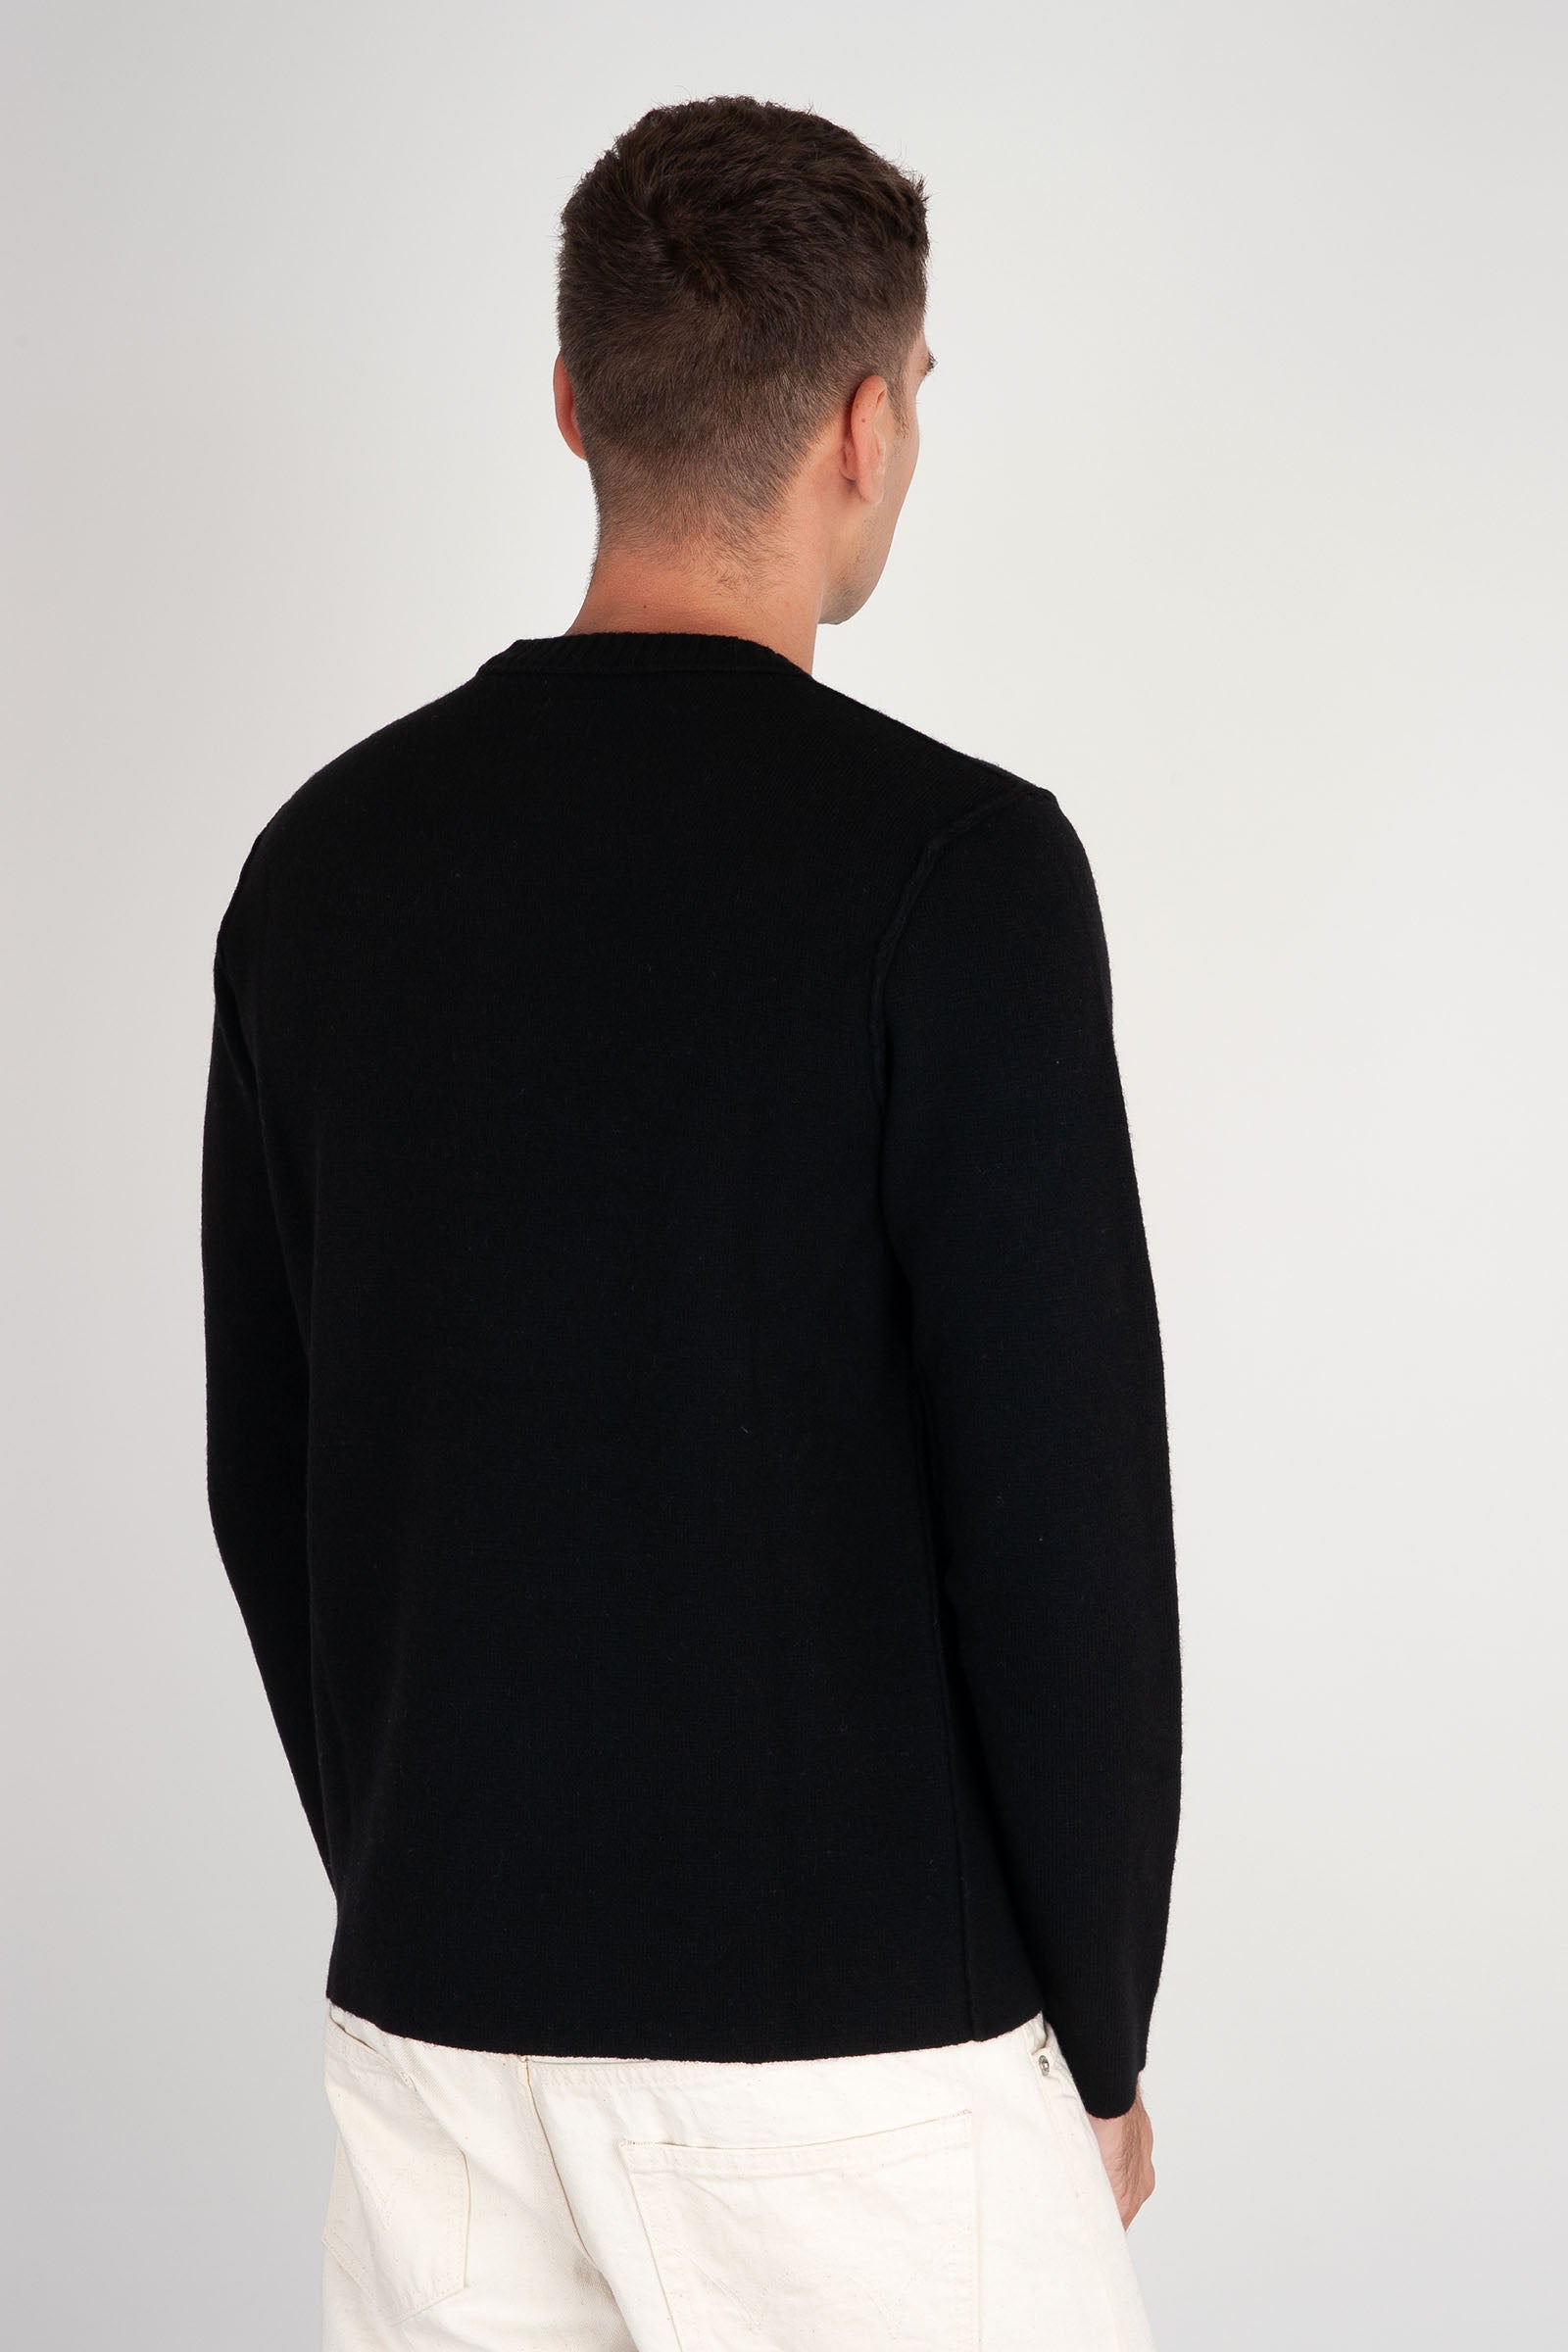 CP Company Lambswool Lens Sweater Black - 4